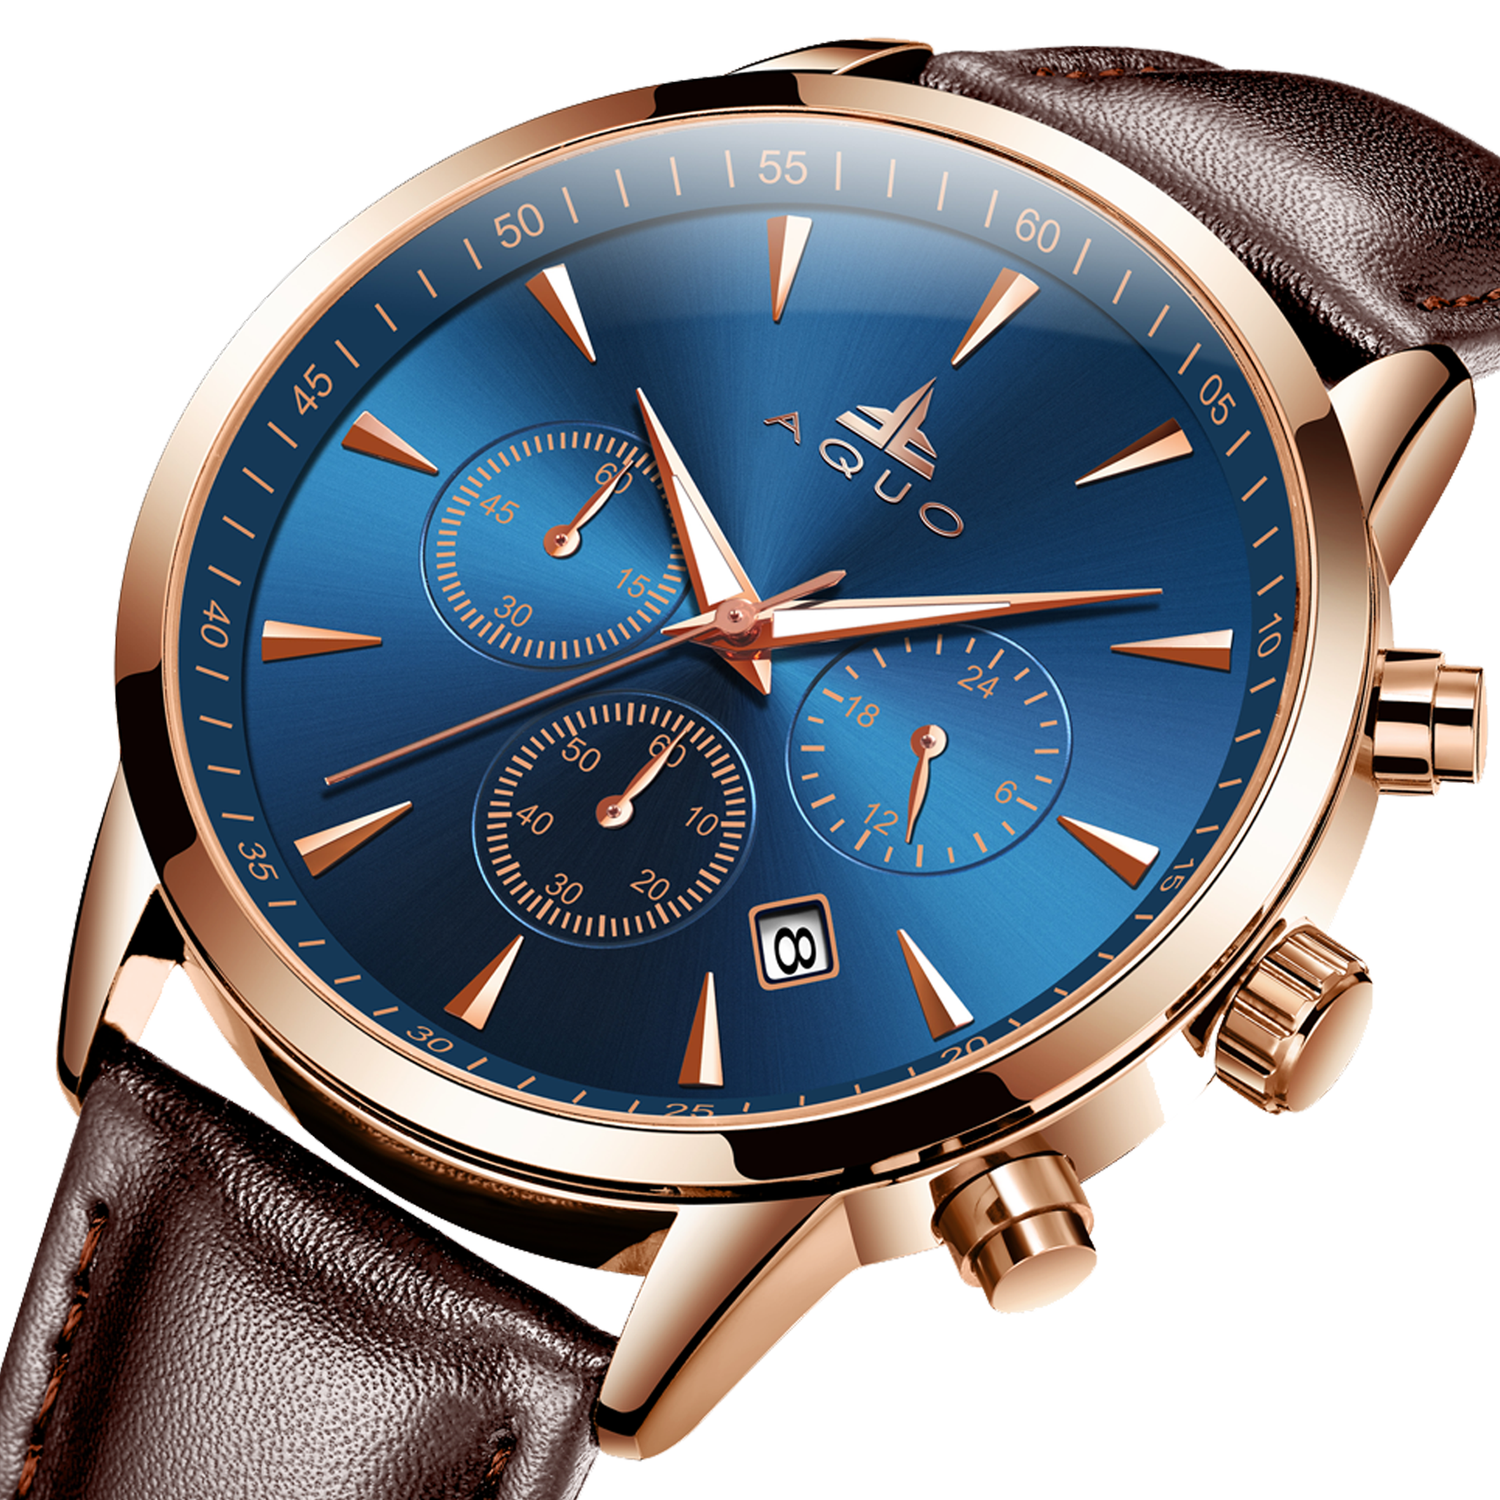 Aquo Chestnut men watch blue dial rose gold case dark chocolate brown genuine leather belt chronograph function with date formal casual